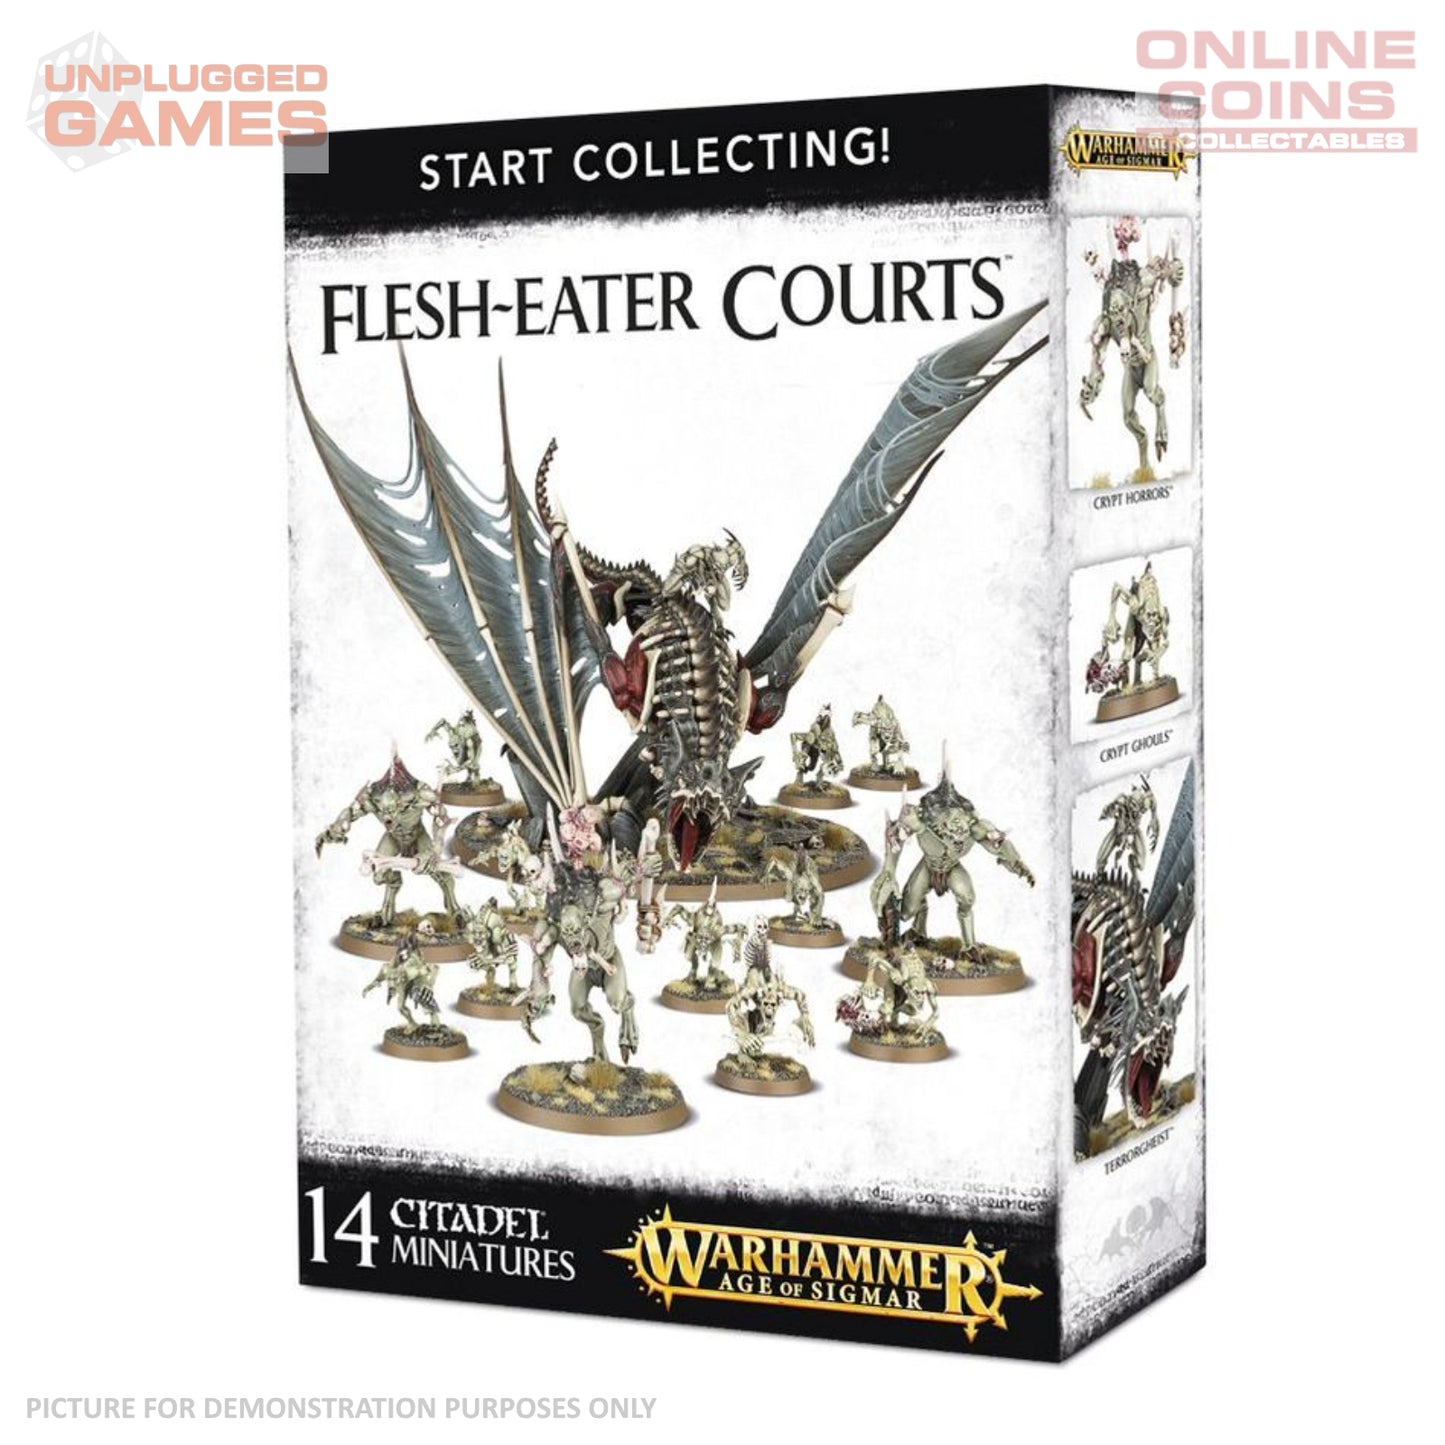 Warhammer Age of Sigmar - Start Collecting Flesh-Eater Courts